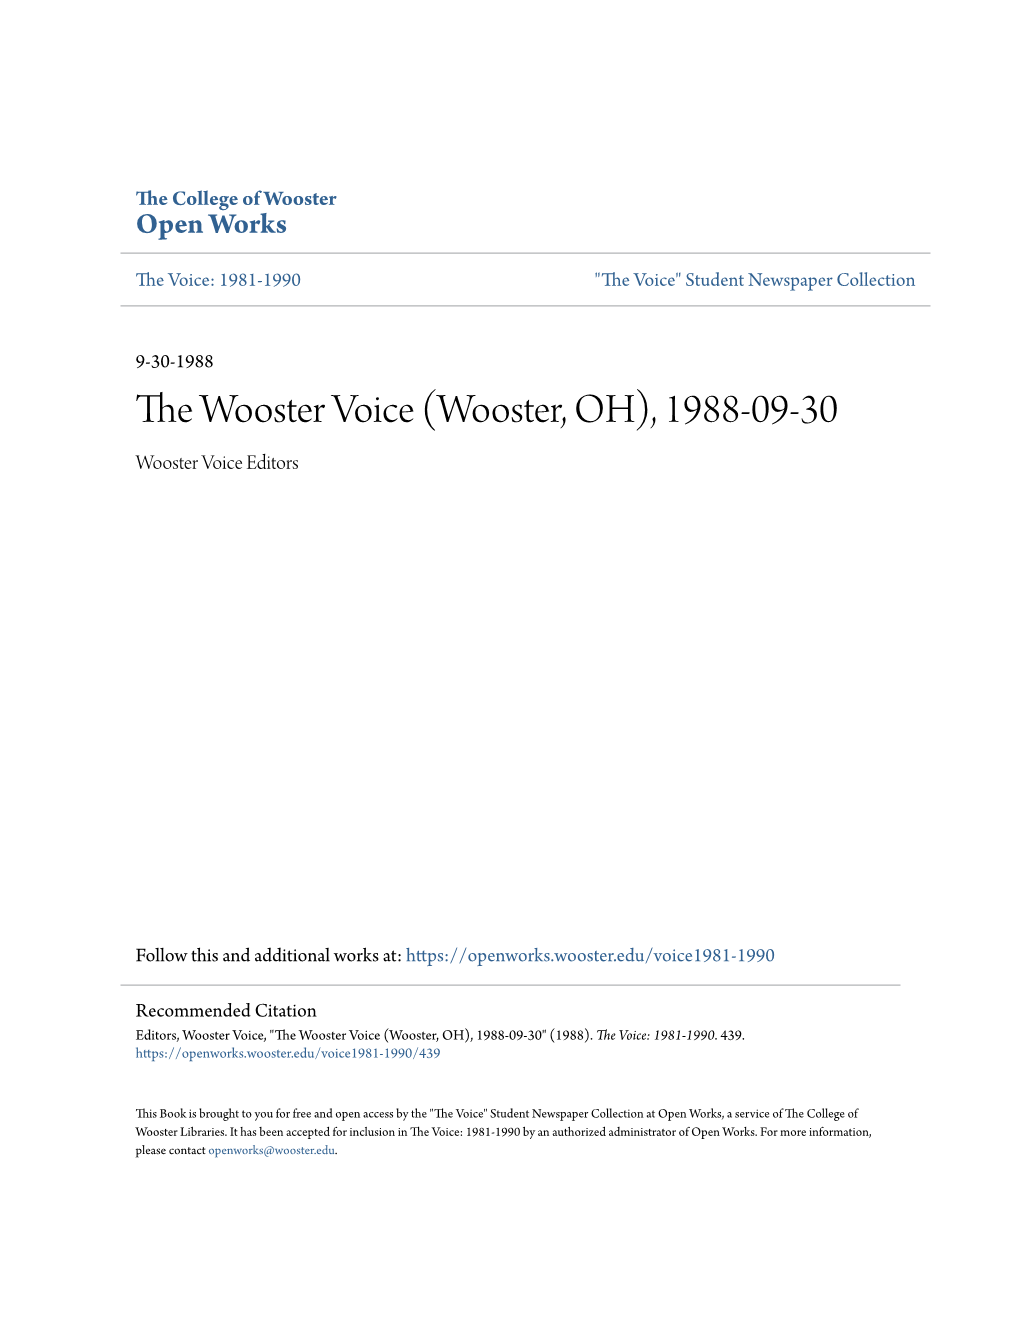 THE Woosterj) VOICE